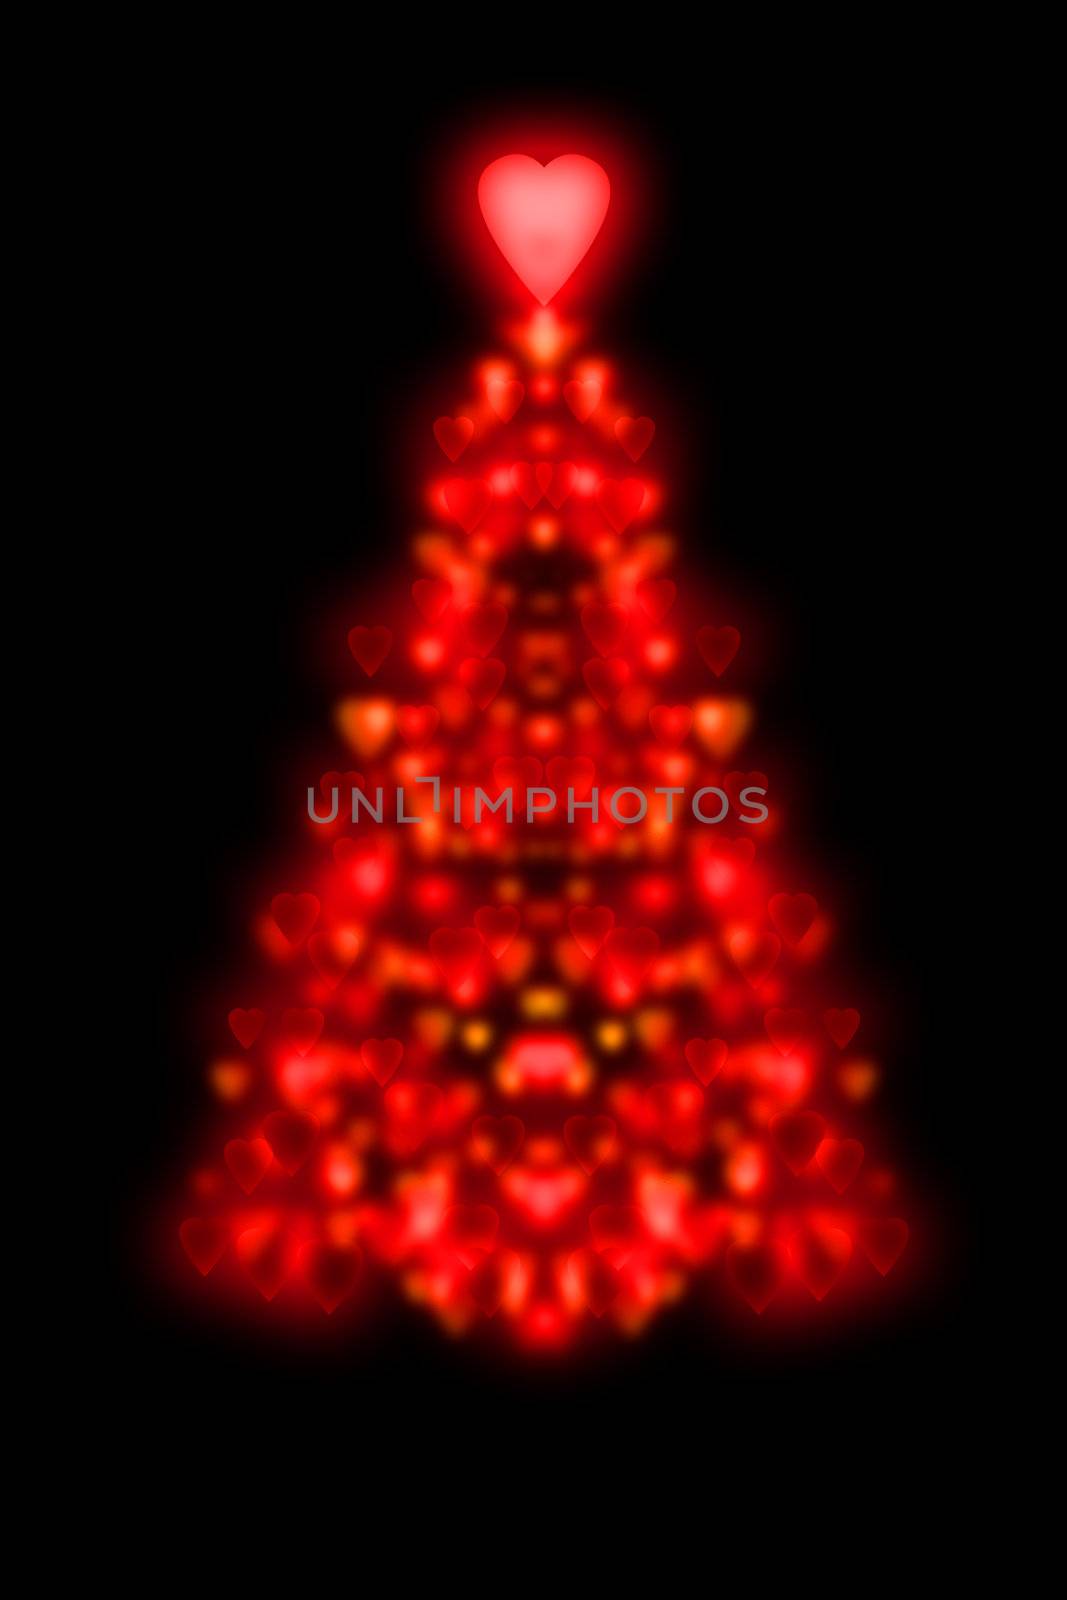 Red Christmas Tree Hearts by tommroch